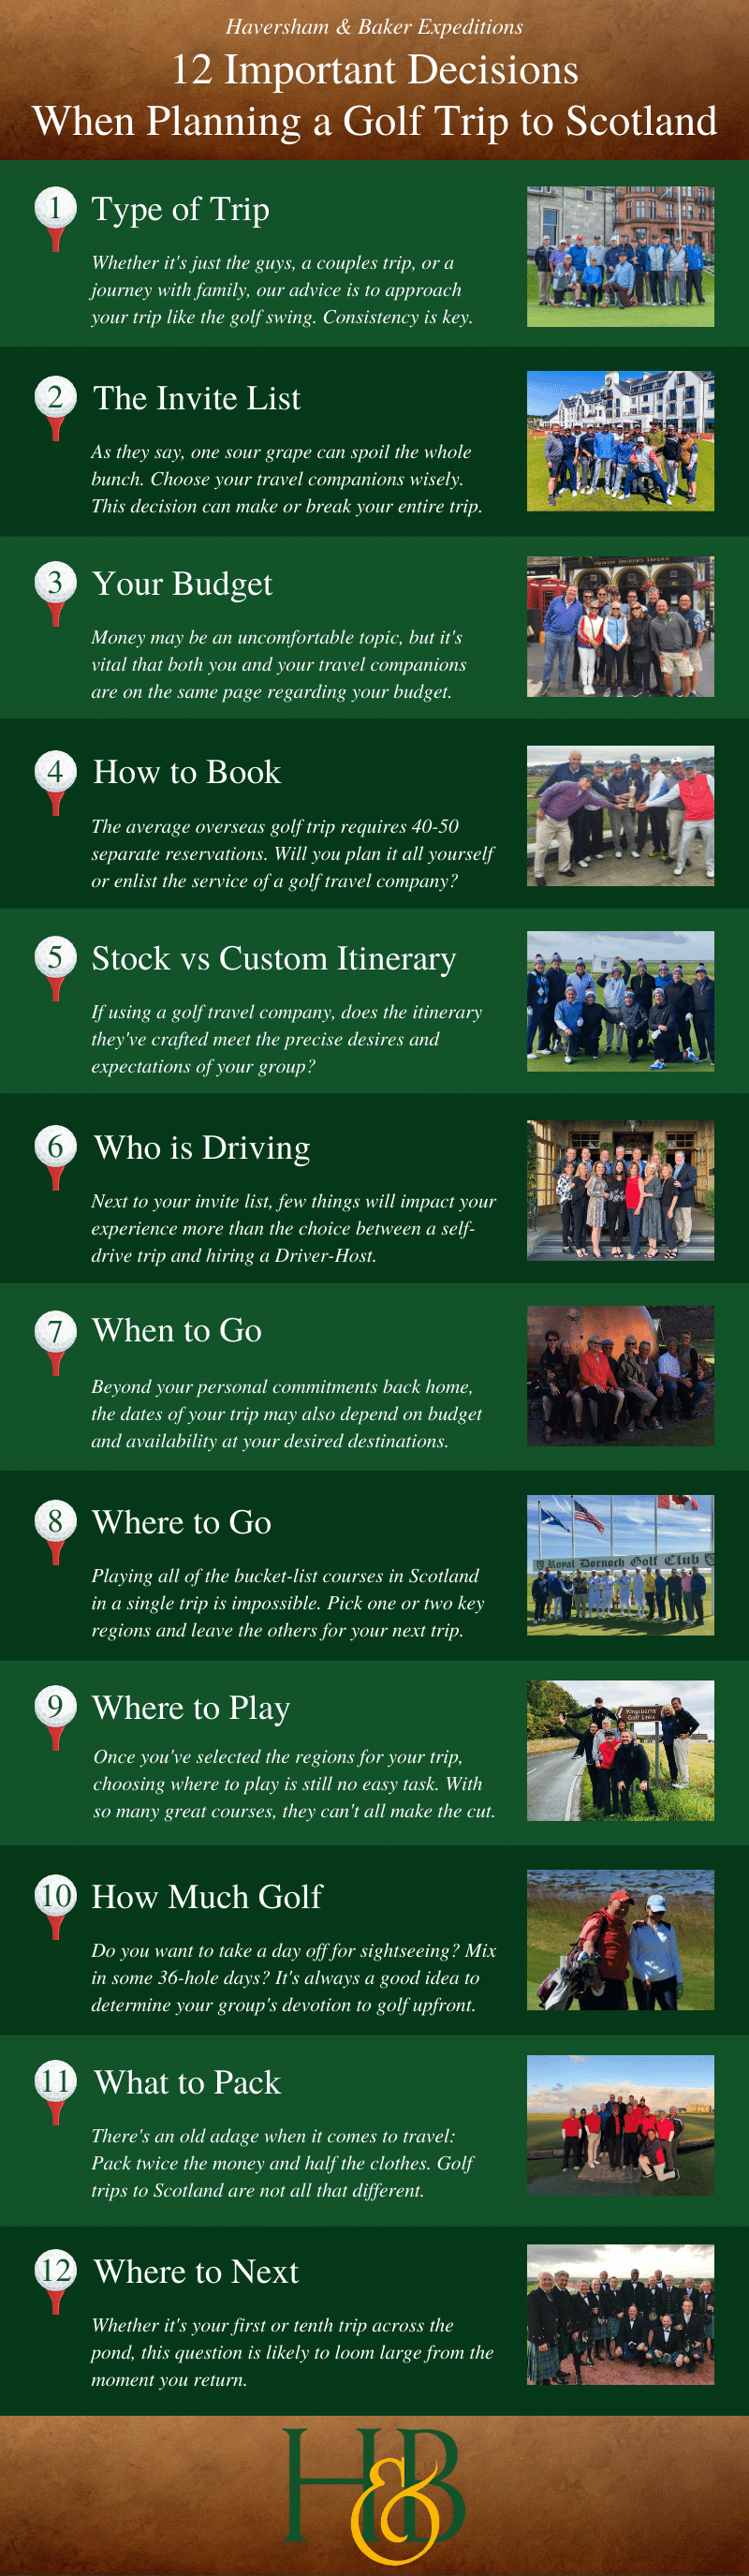 How to Plan a Golf Trip to Scotland Infographic